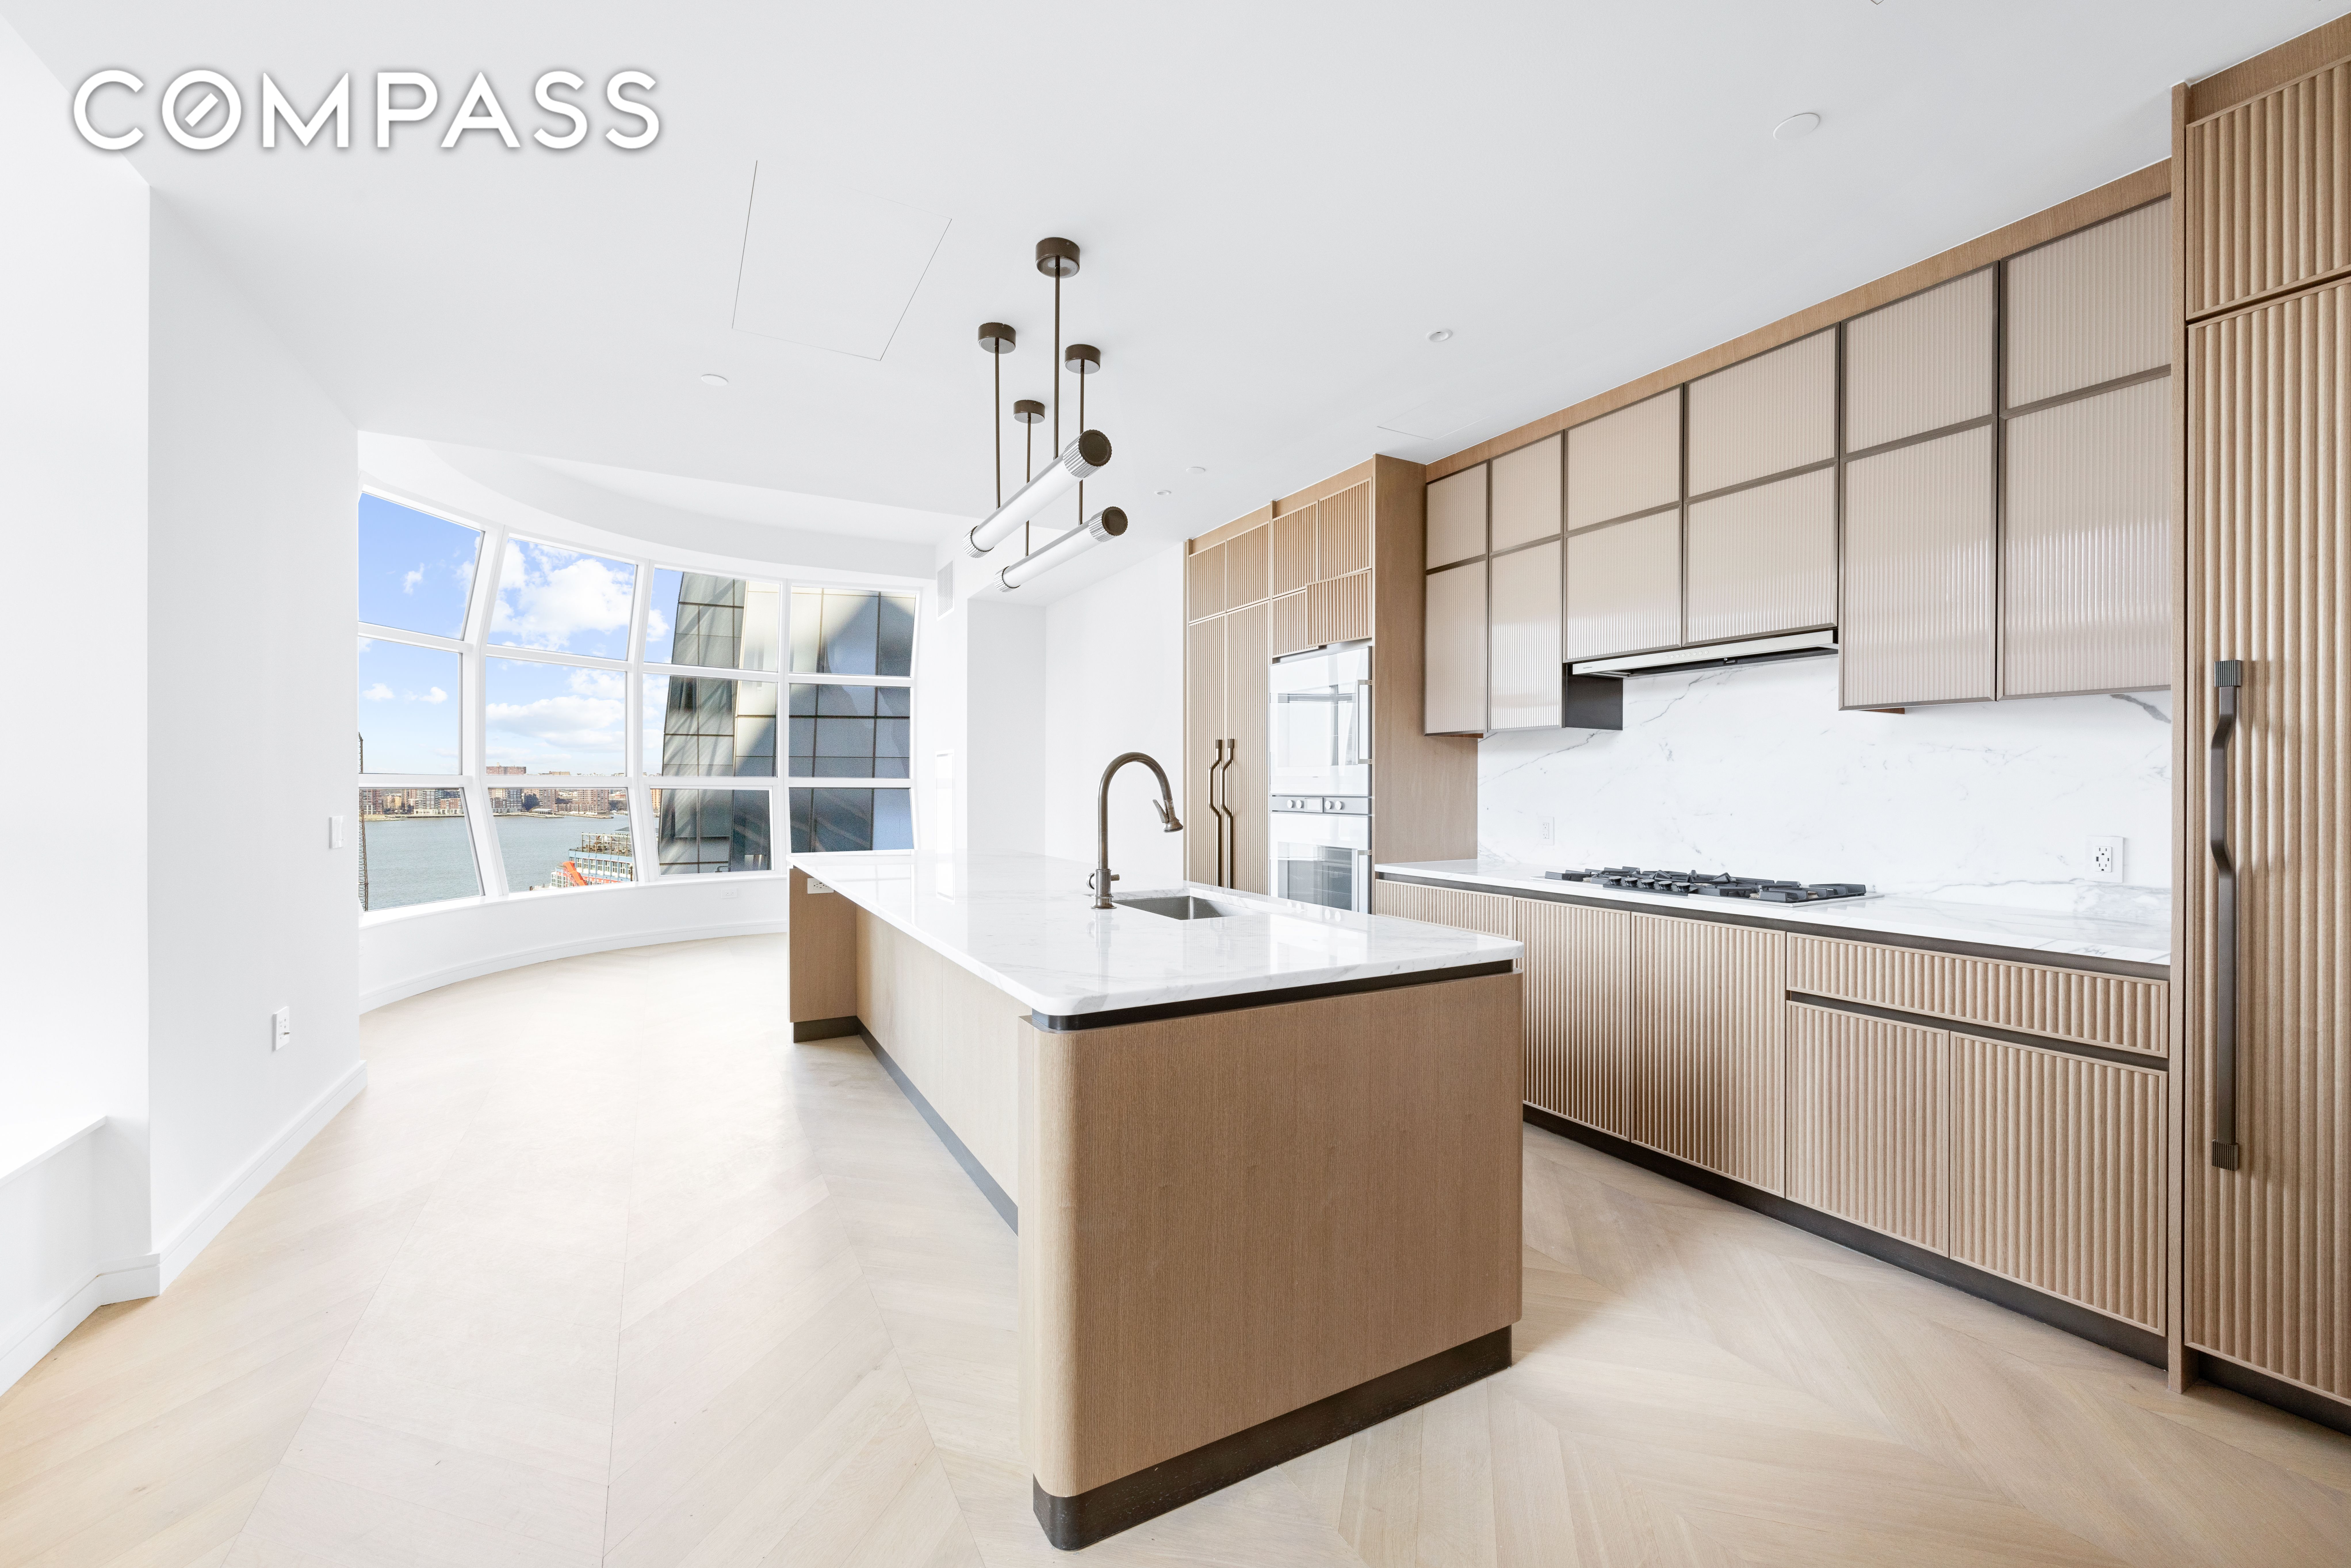 515 West 18th Street 1010, Chelsea, Downtown, NYC - 3 Bedrooms  
3.5 Bathrooms  
5 Rooms - 